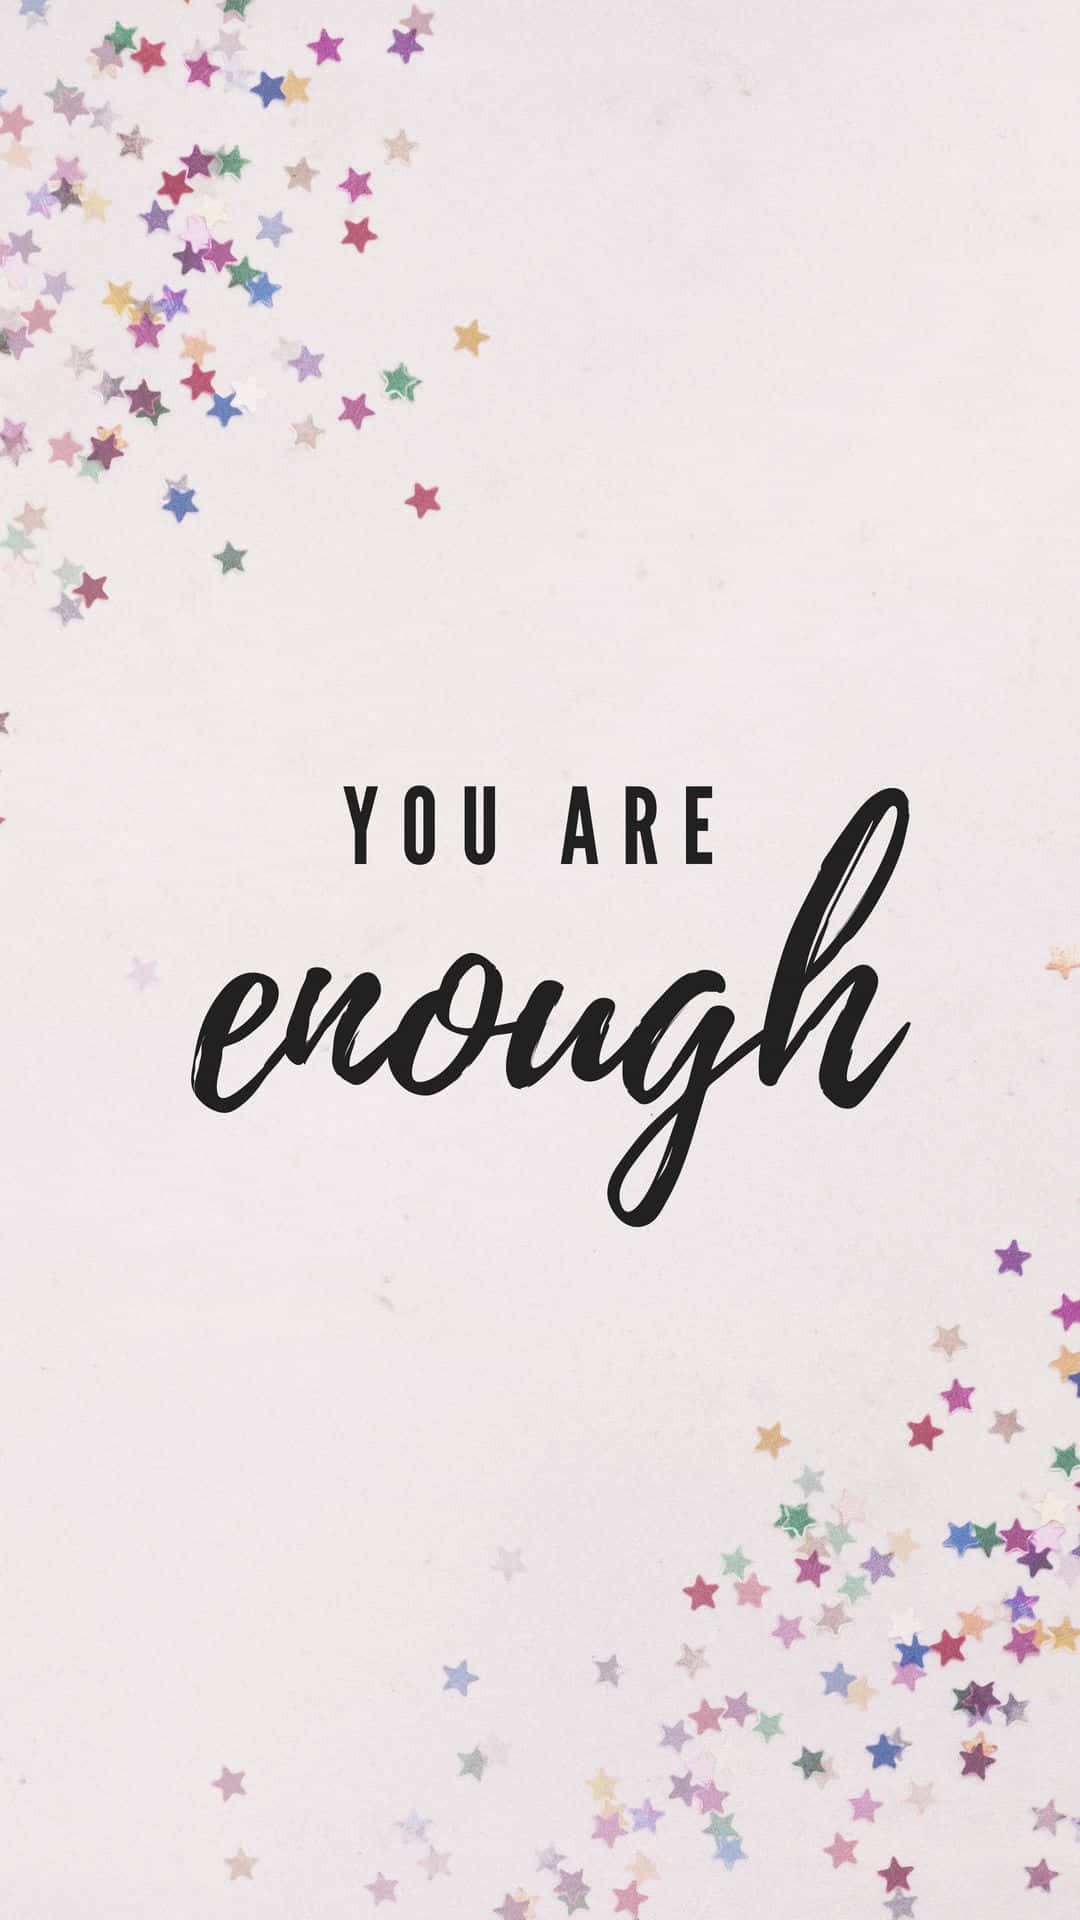 You Are Enough - Inspirational Quote Wallpaper